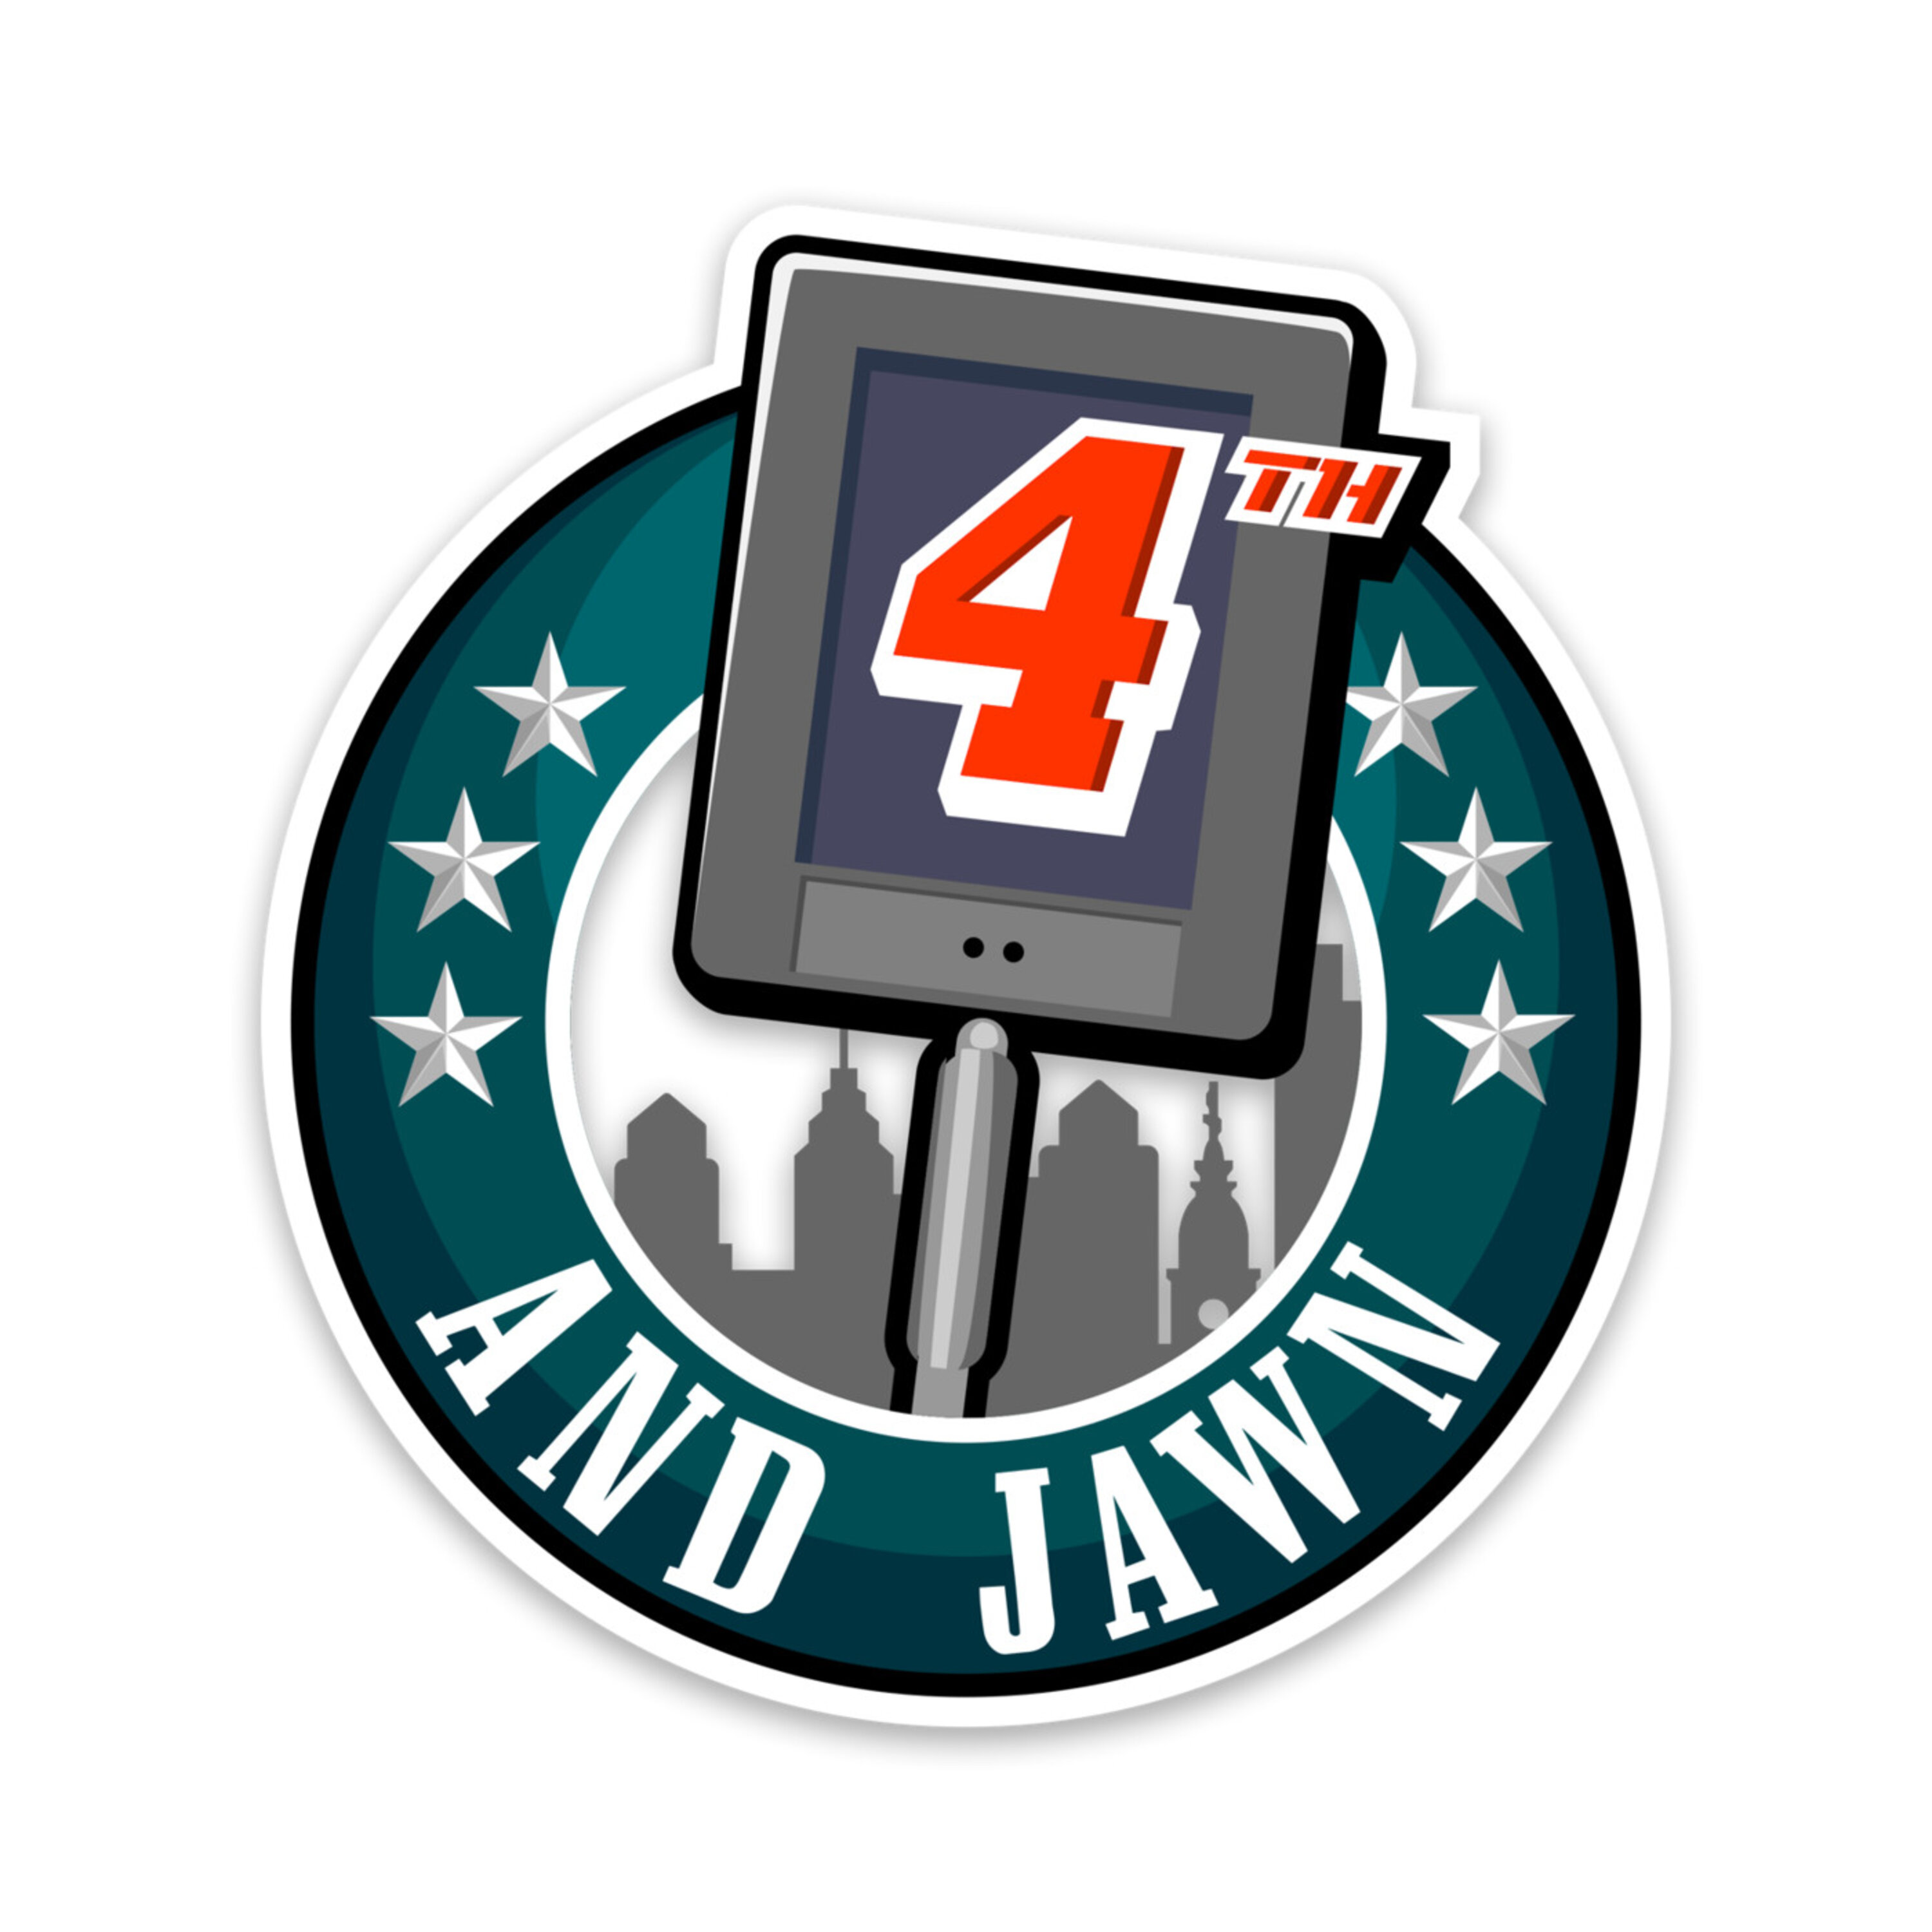 4th and Jawn - Episode 255 - Eagles/Bucs Playoff Preview with JC Allen